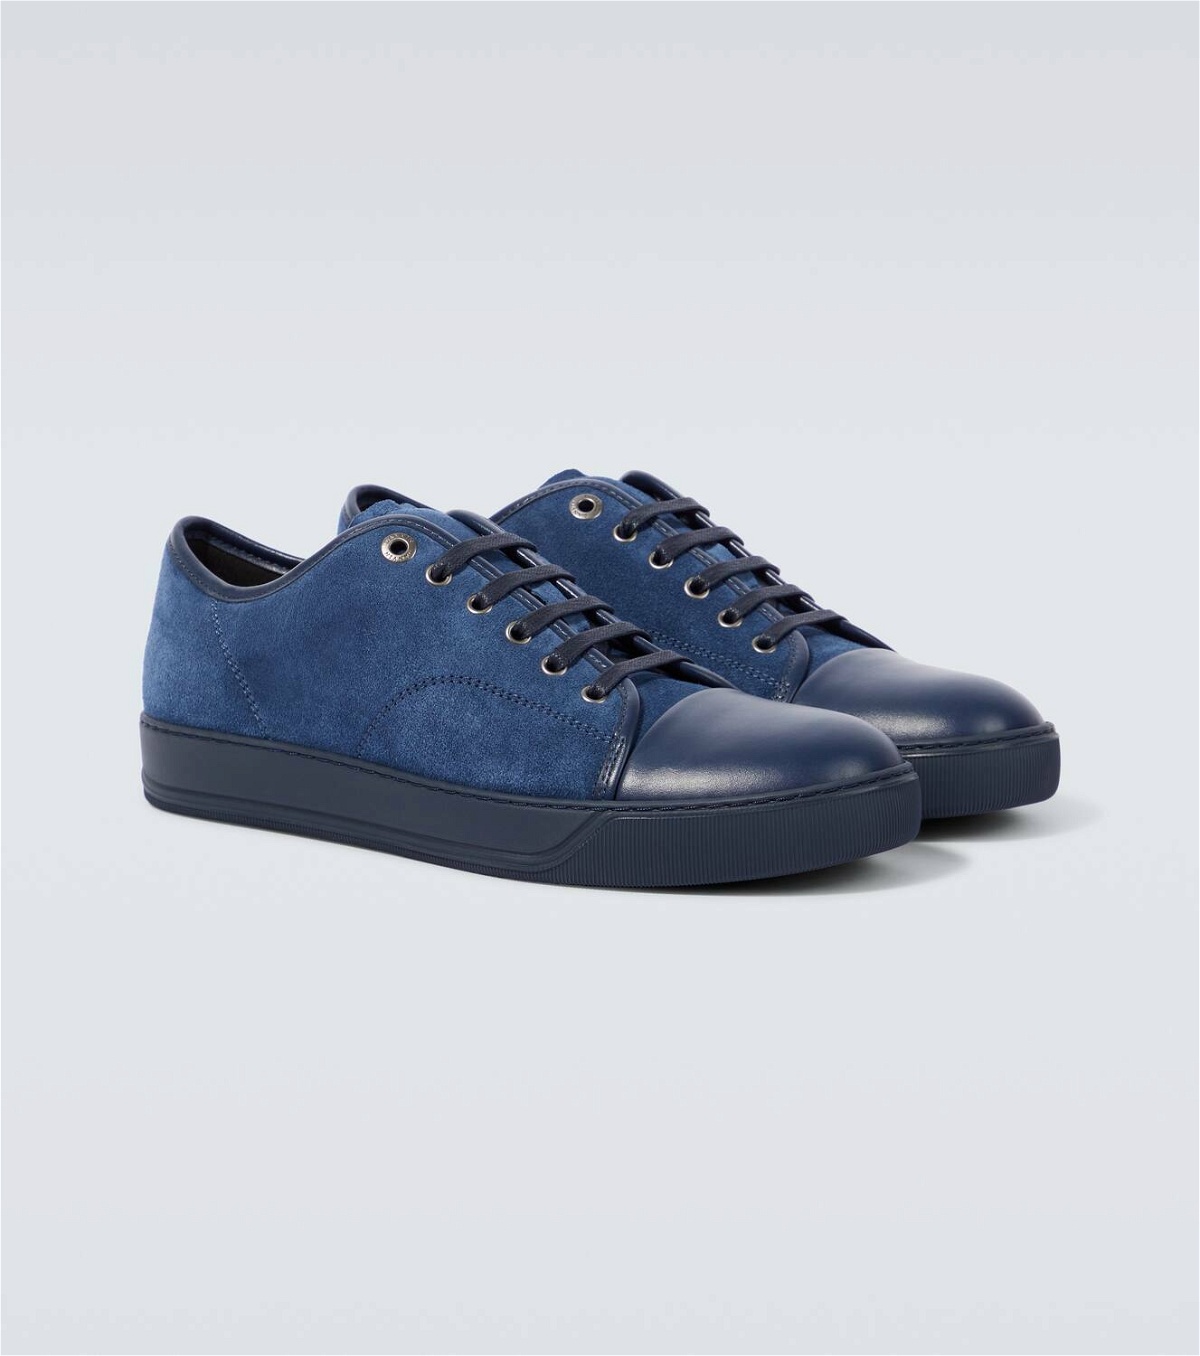 Lanvin DBB1 leather and suede sneakers Lanvin